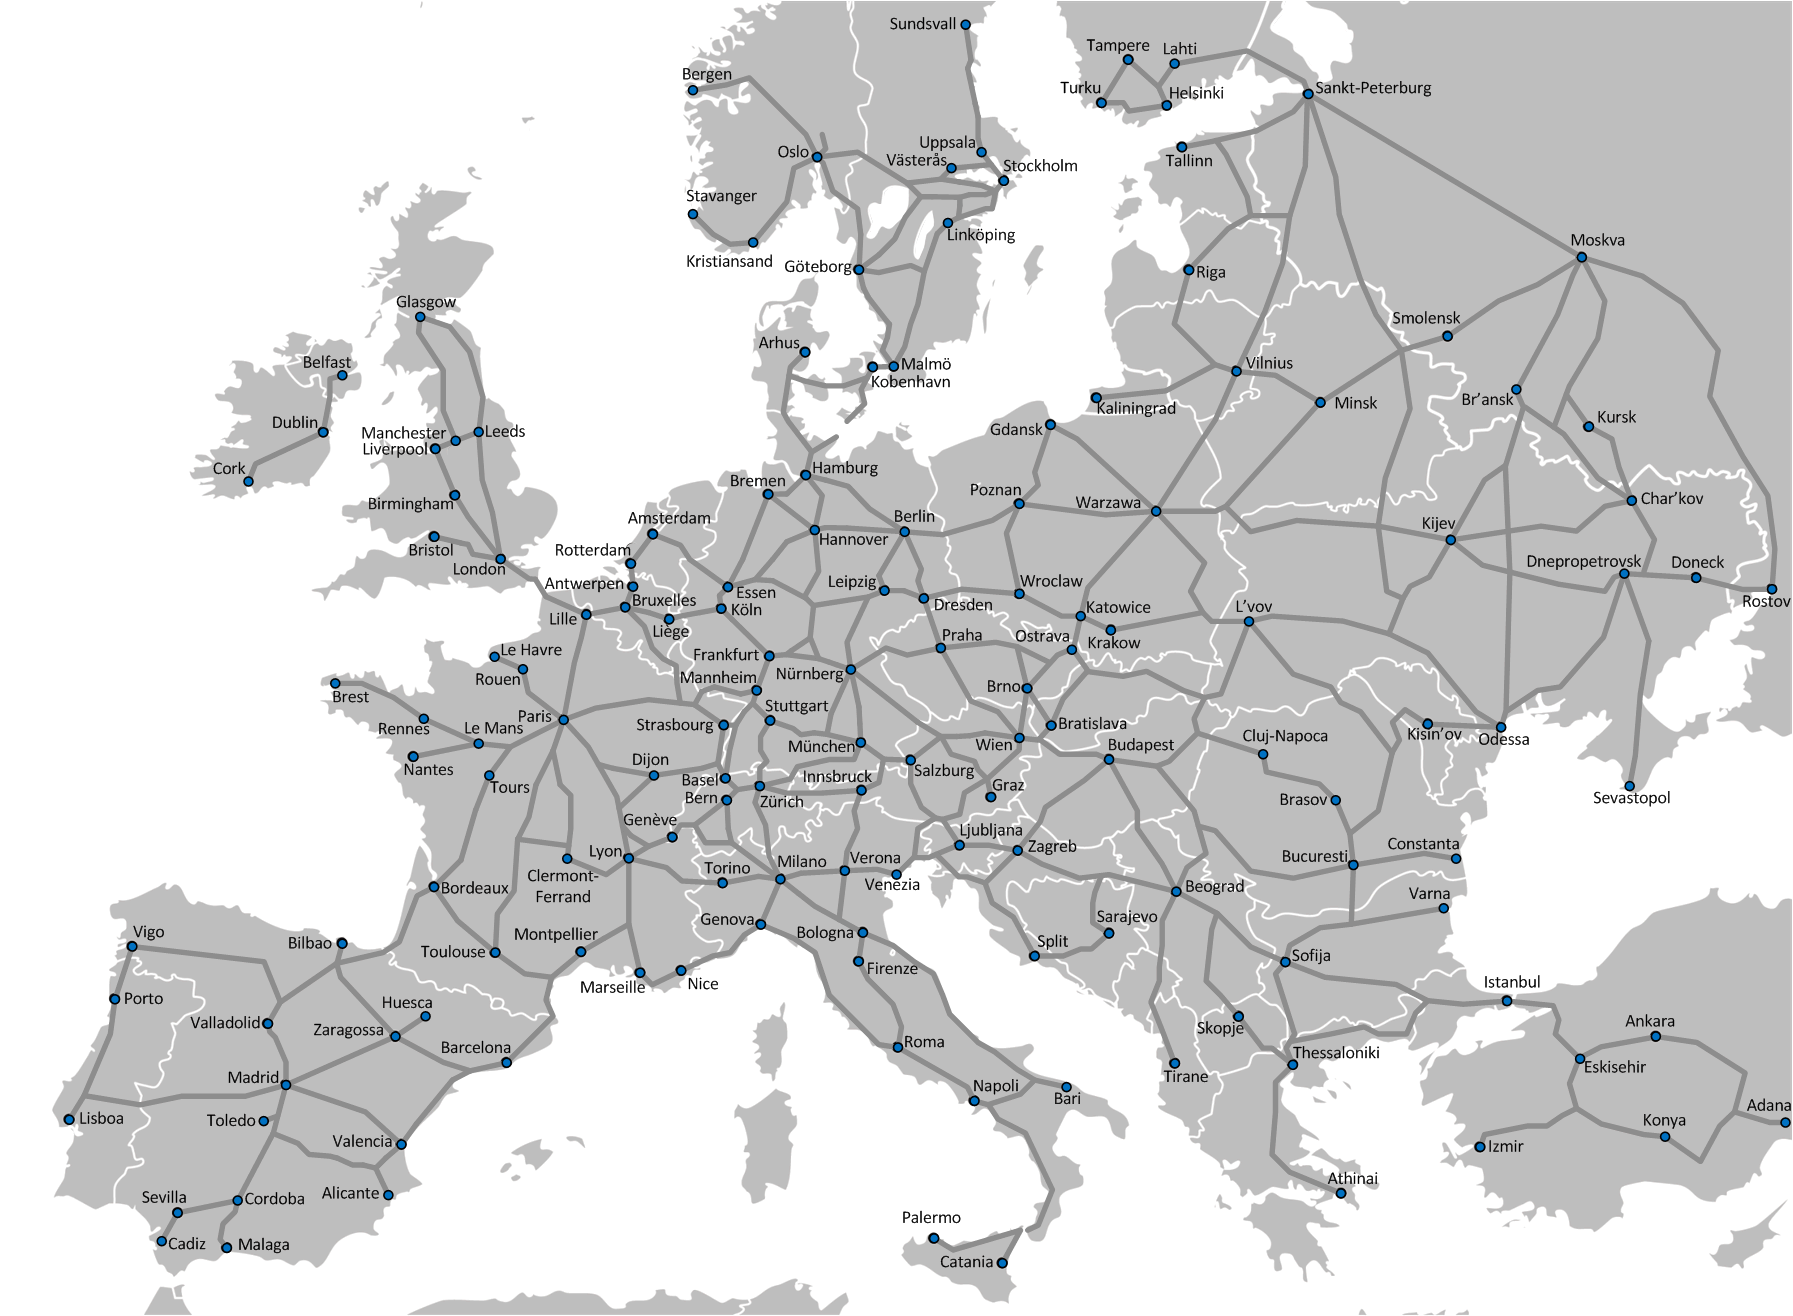 Map Of Europe Trains